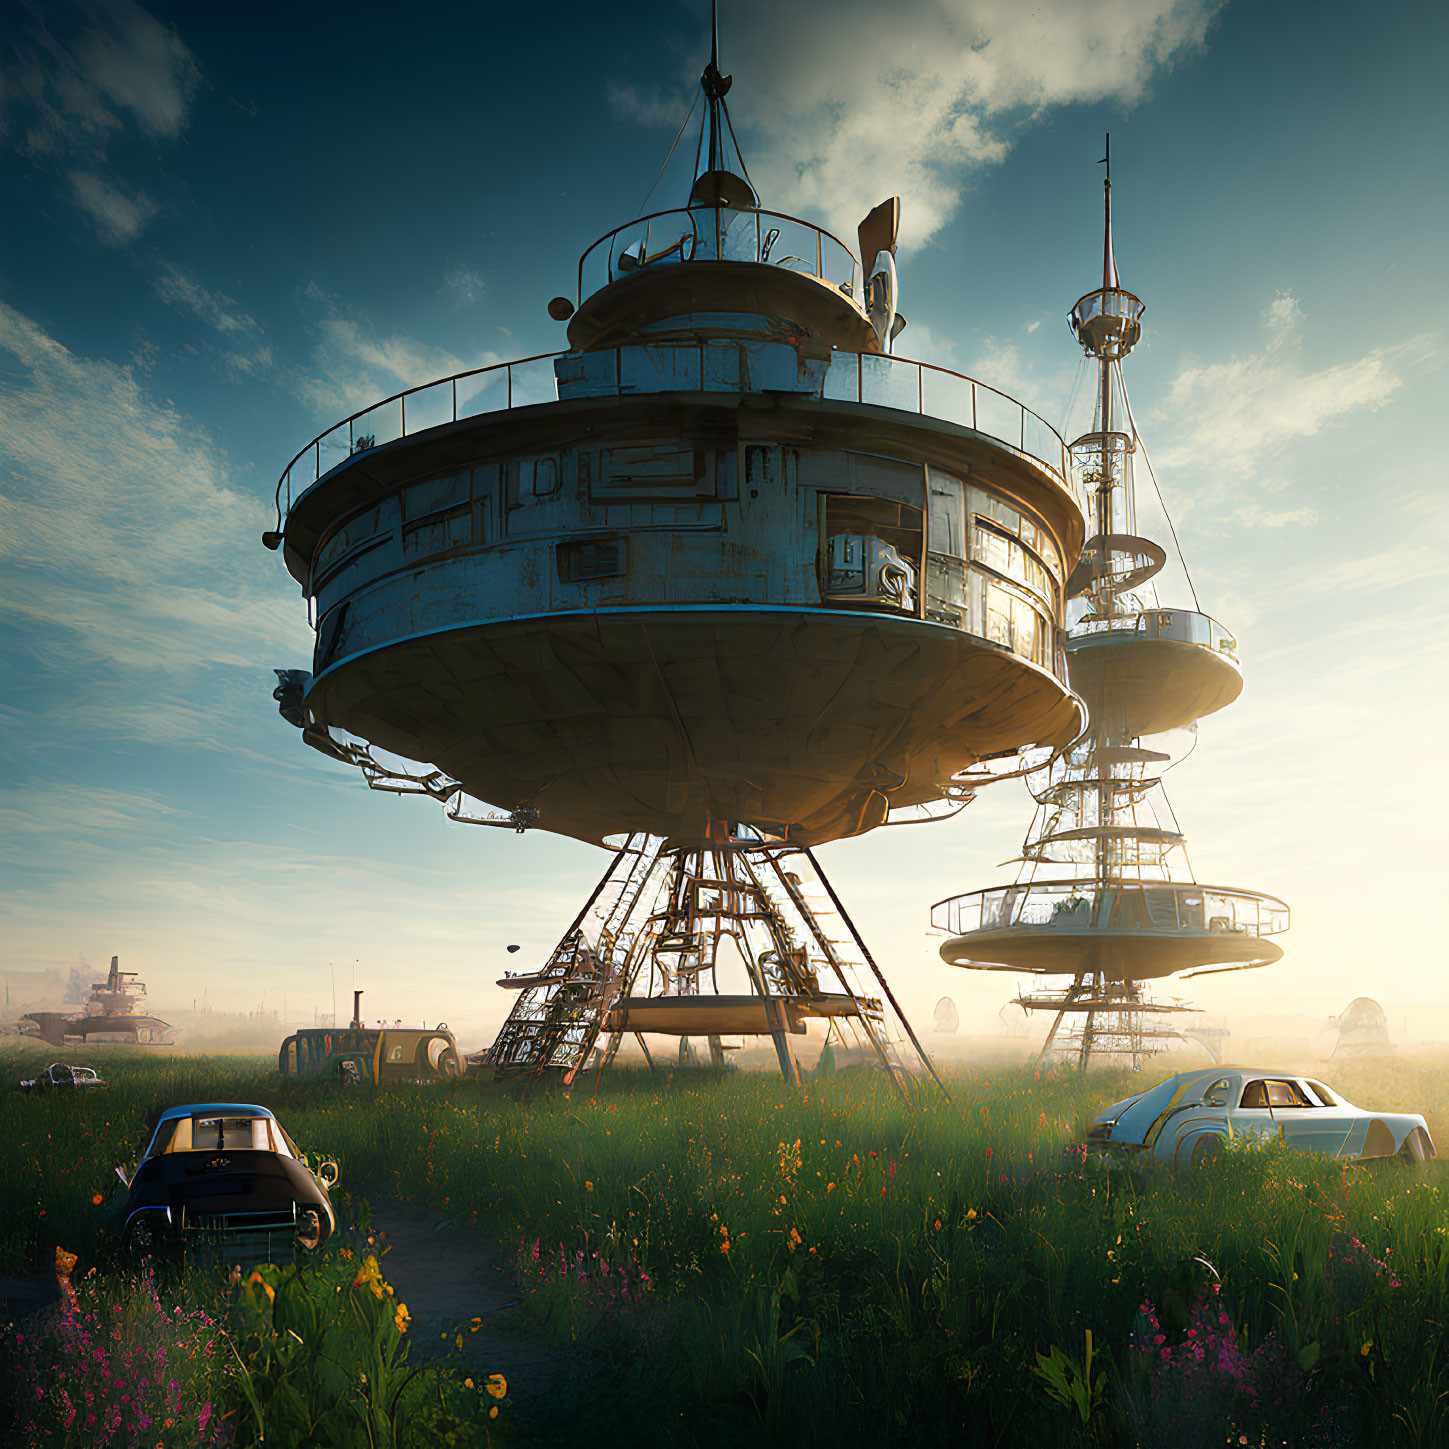 Circular Platform Towers Over Flowers with Retro Cars Below